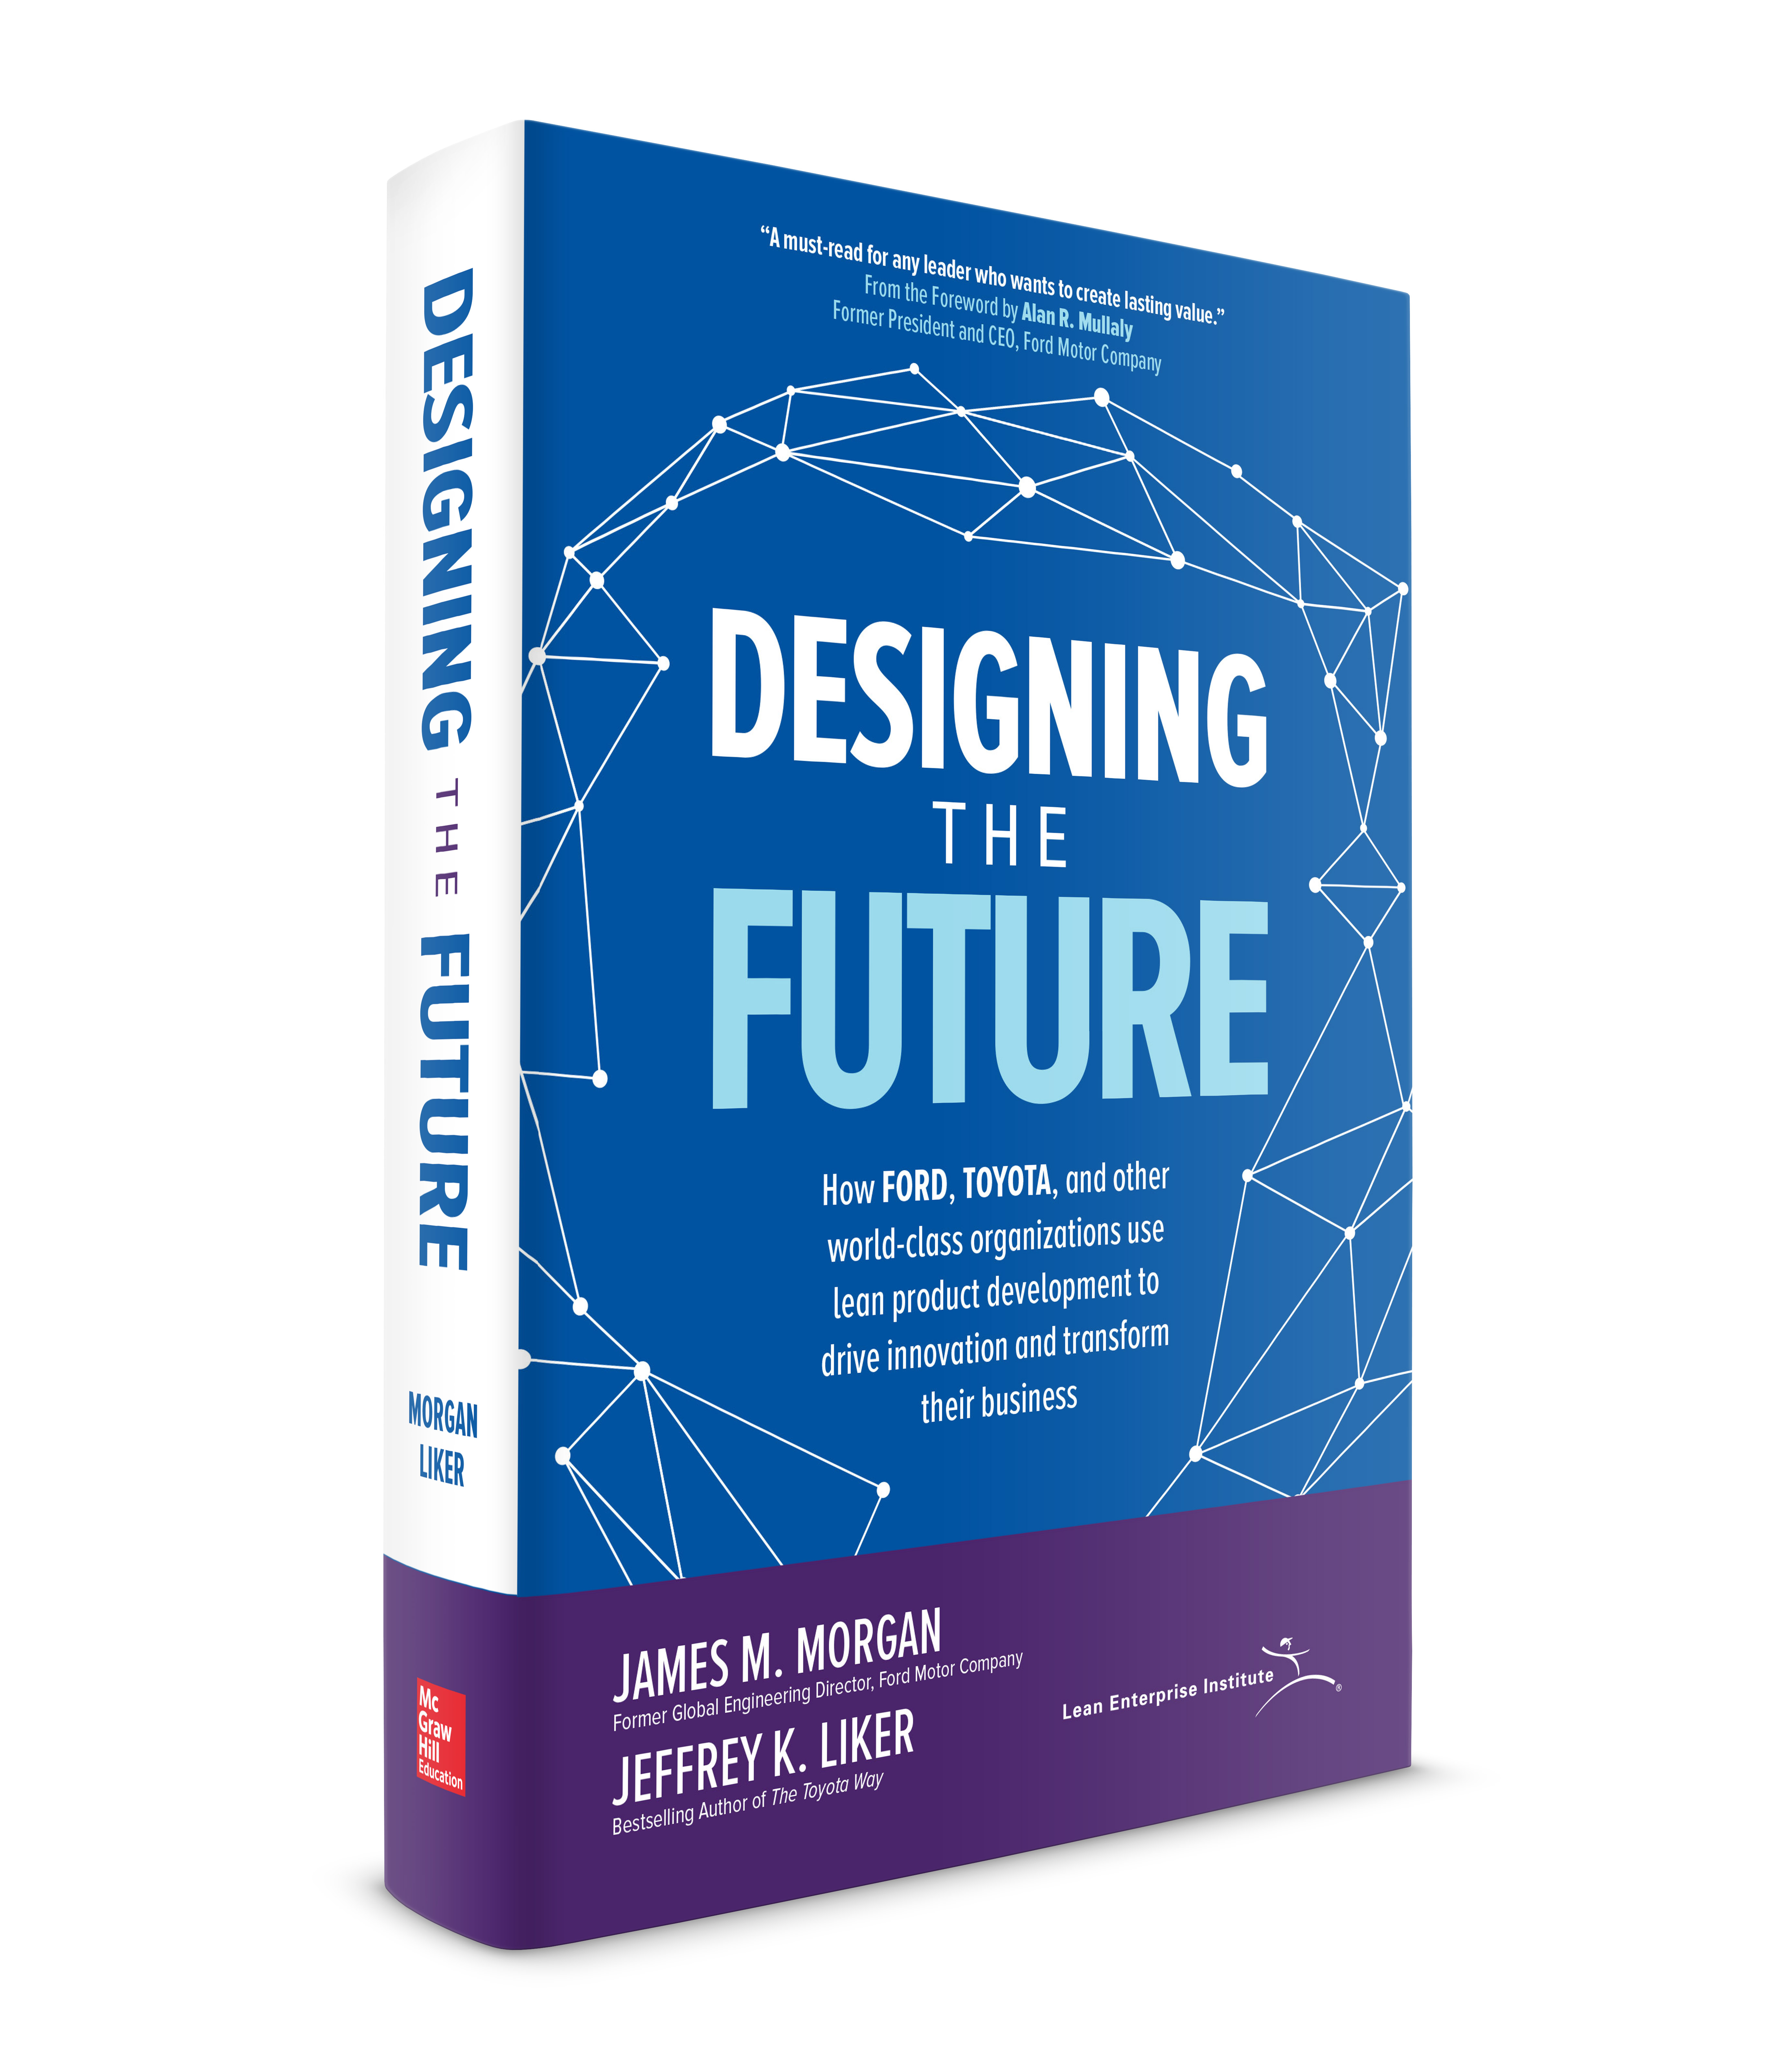 Designing the Future is Jim Morgan's latest book, co-authored with Jeff Liker.